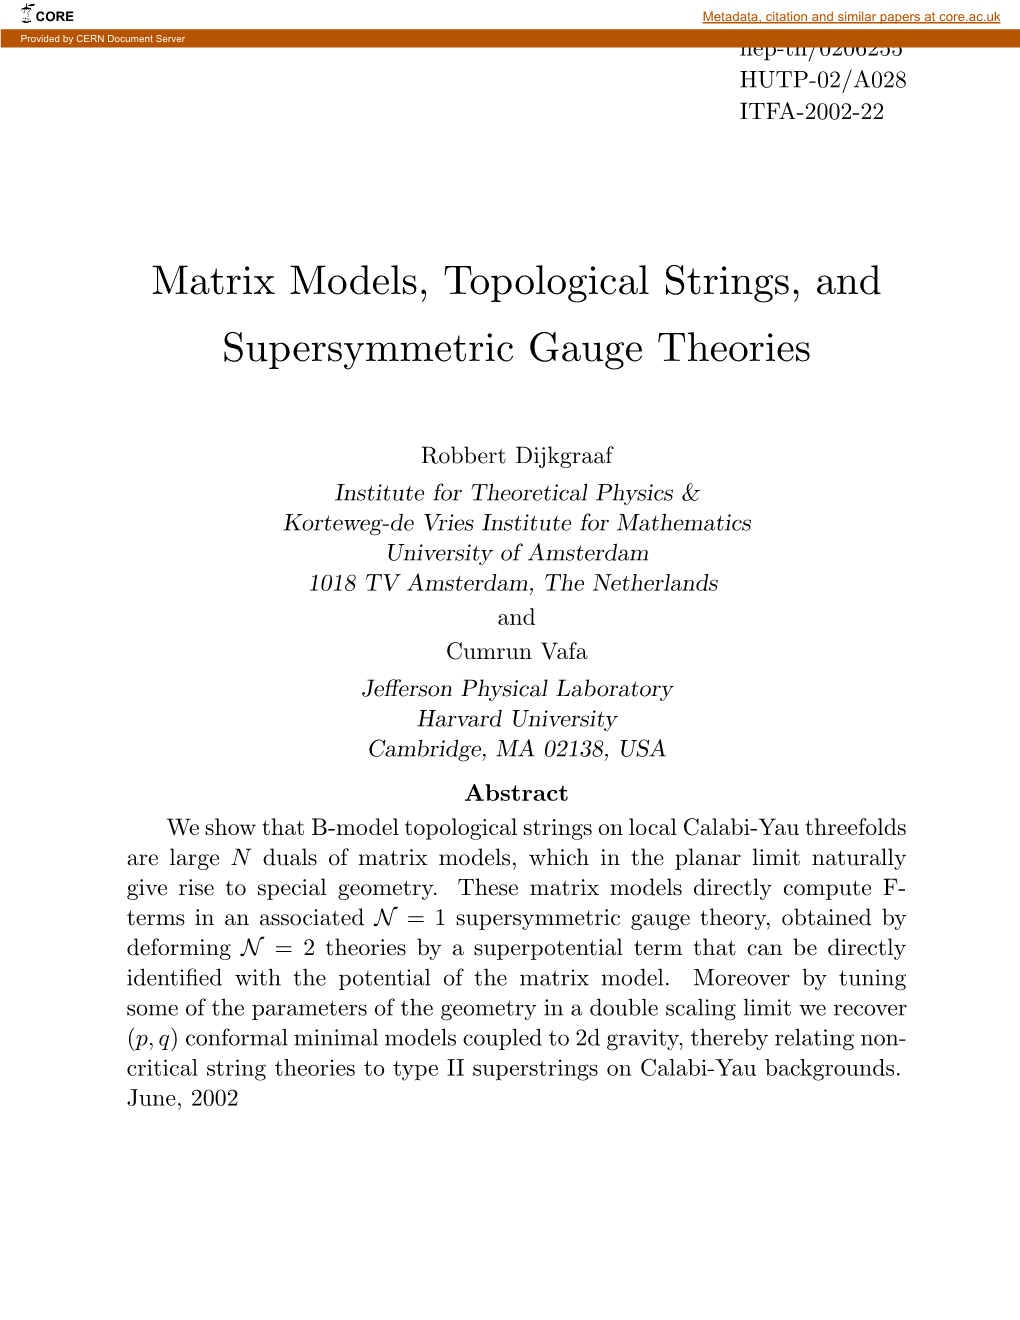 Matrix Models, Topological Strings, and Supersymmetric Gauge Theories